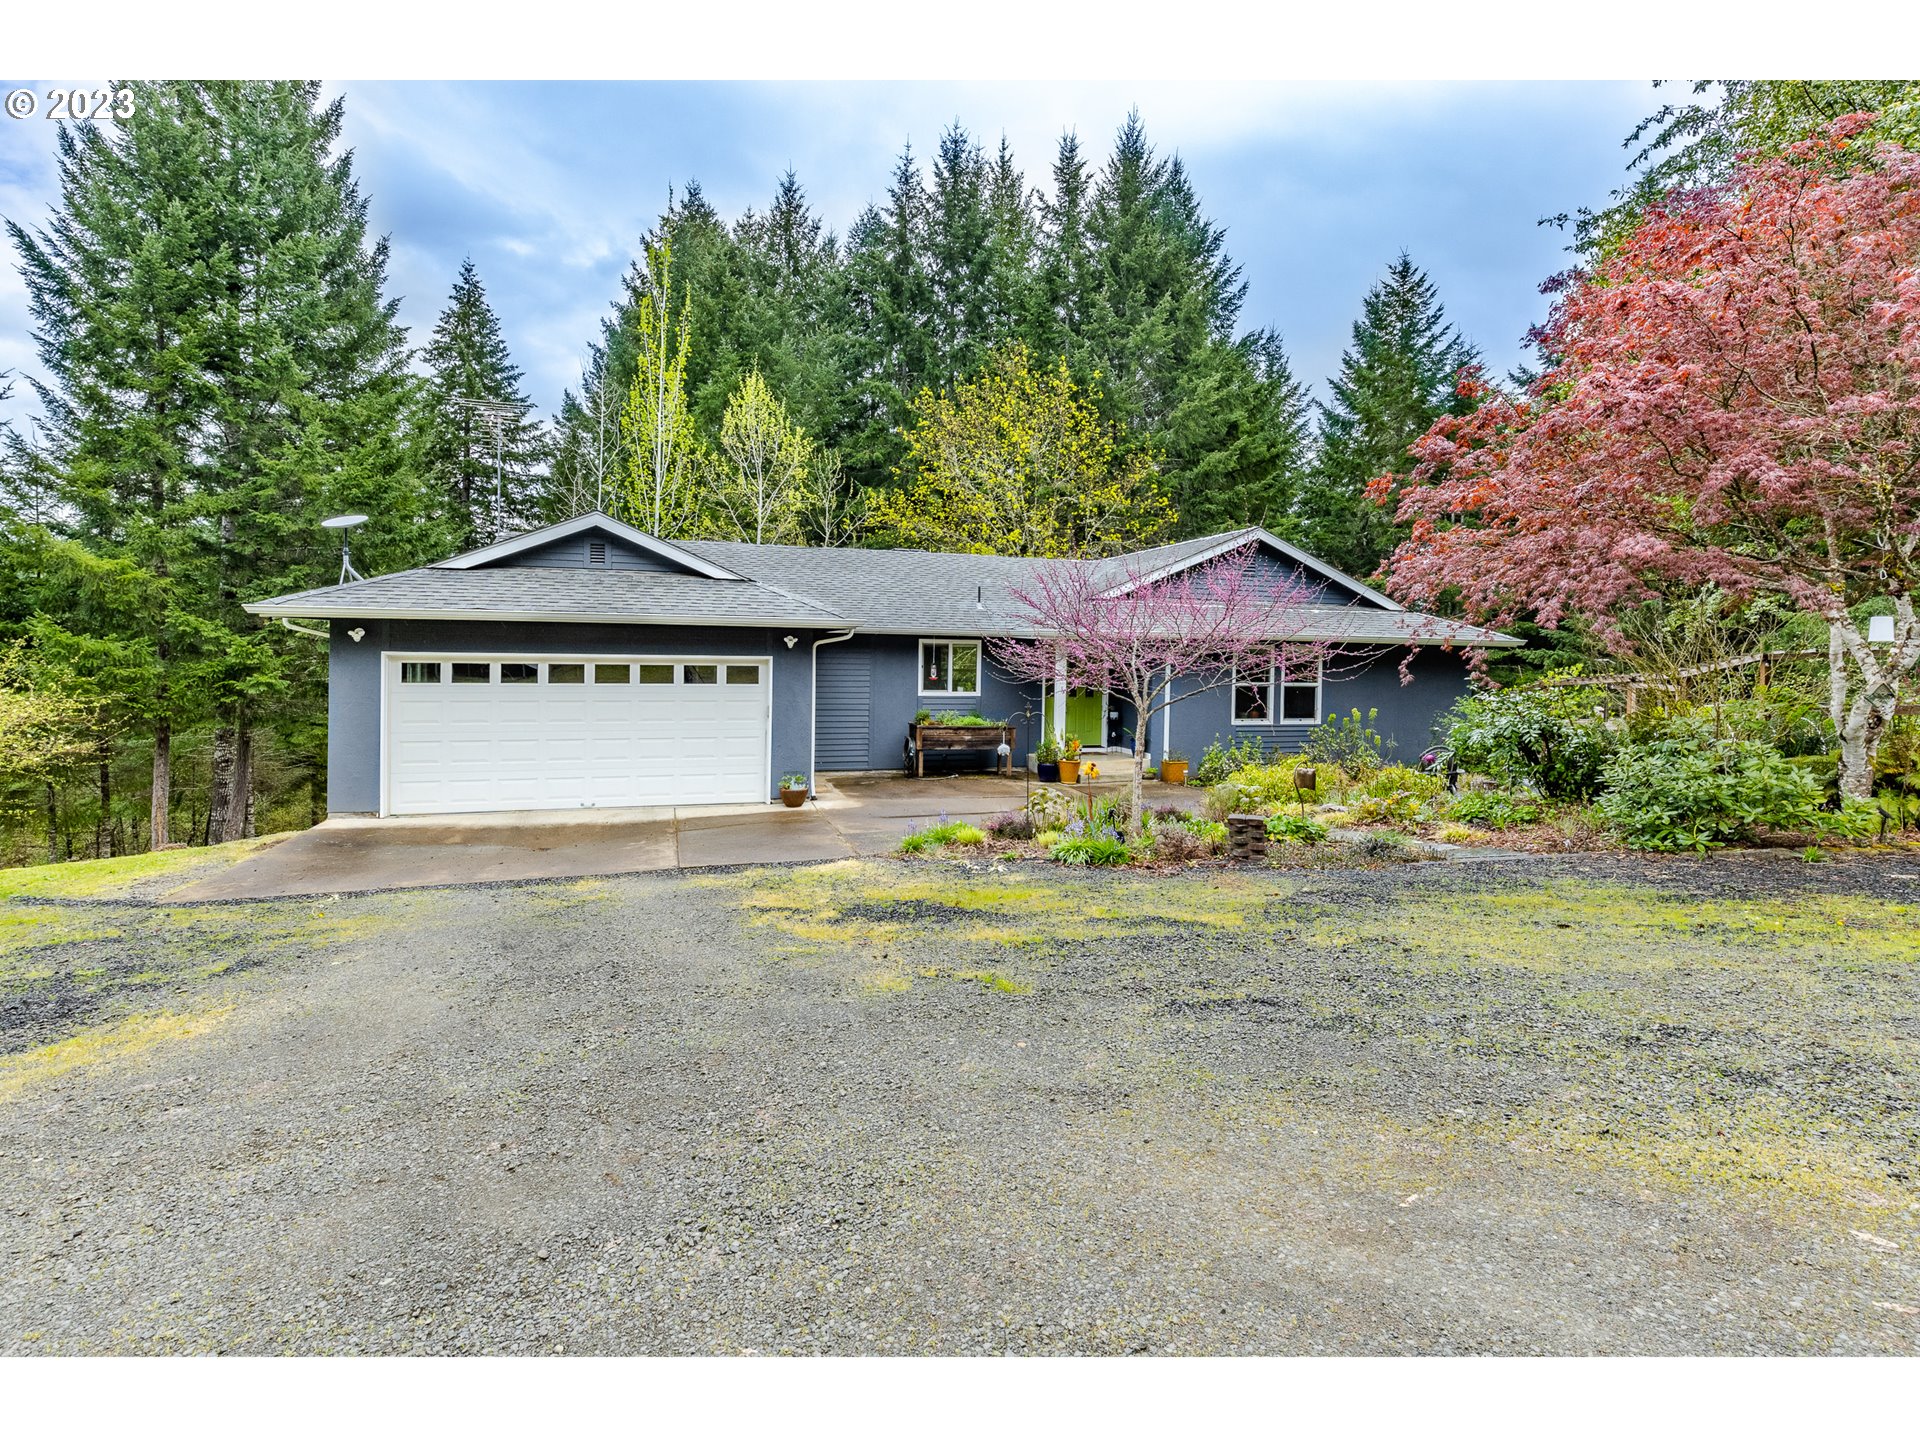 89245 FOREST VIEW DR, Elmira, OR 97437